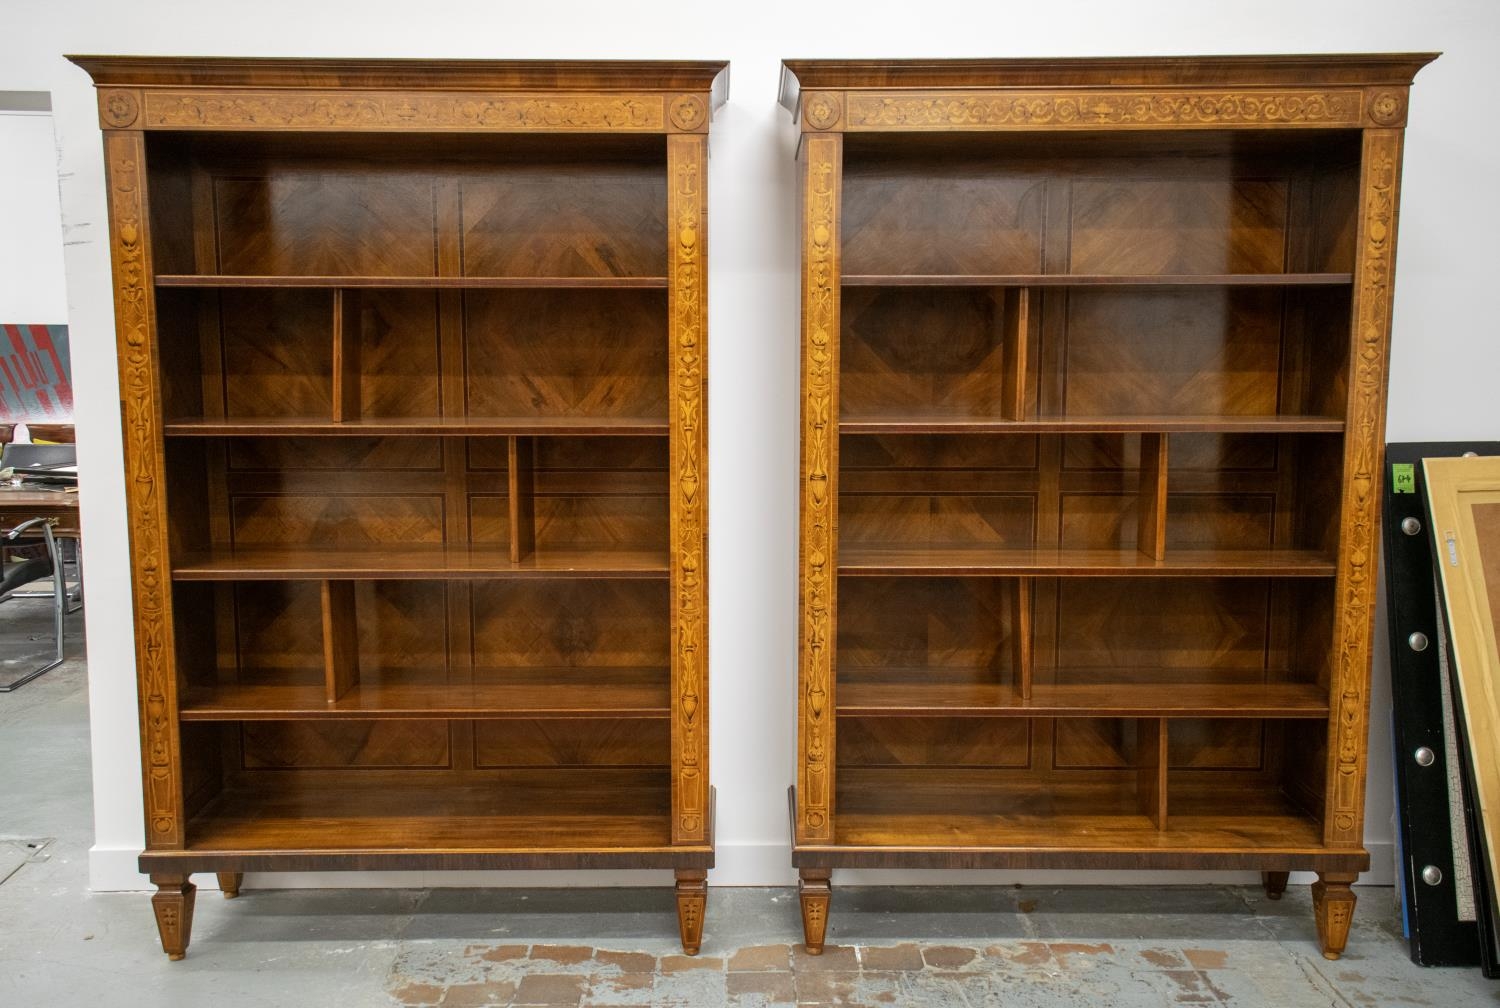 OPEN BOOKCASES, a pair, to match previous lot, 212cm H x 145cm x 51cm. (2) - Image 2 of 10